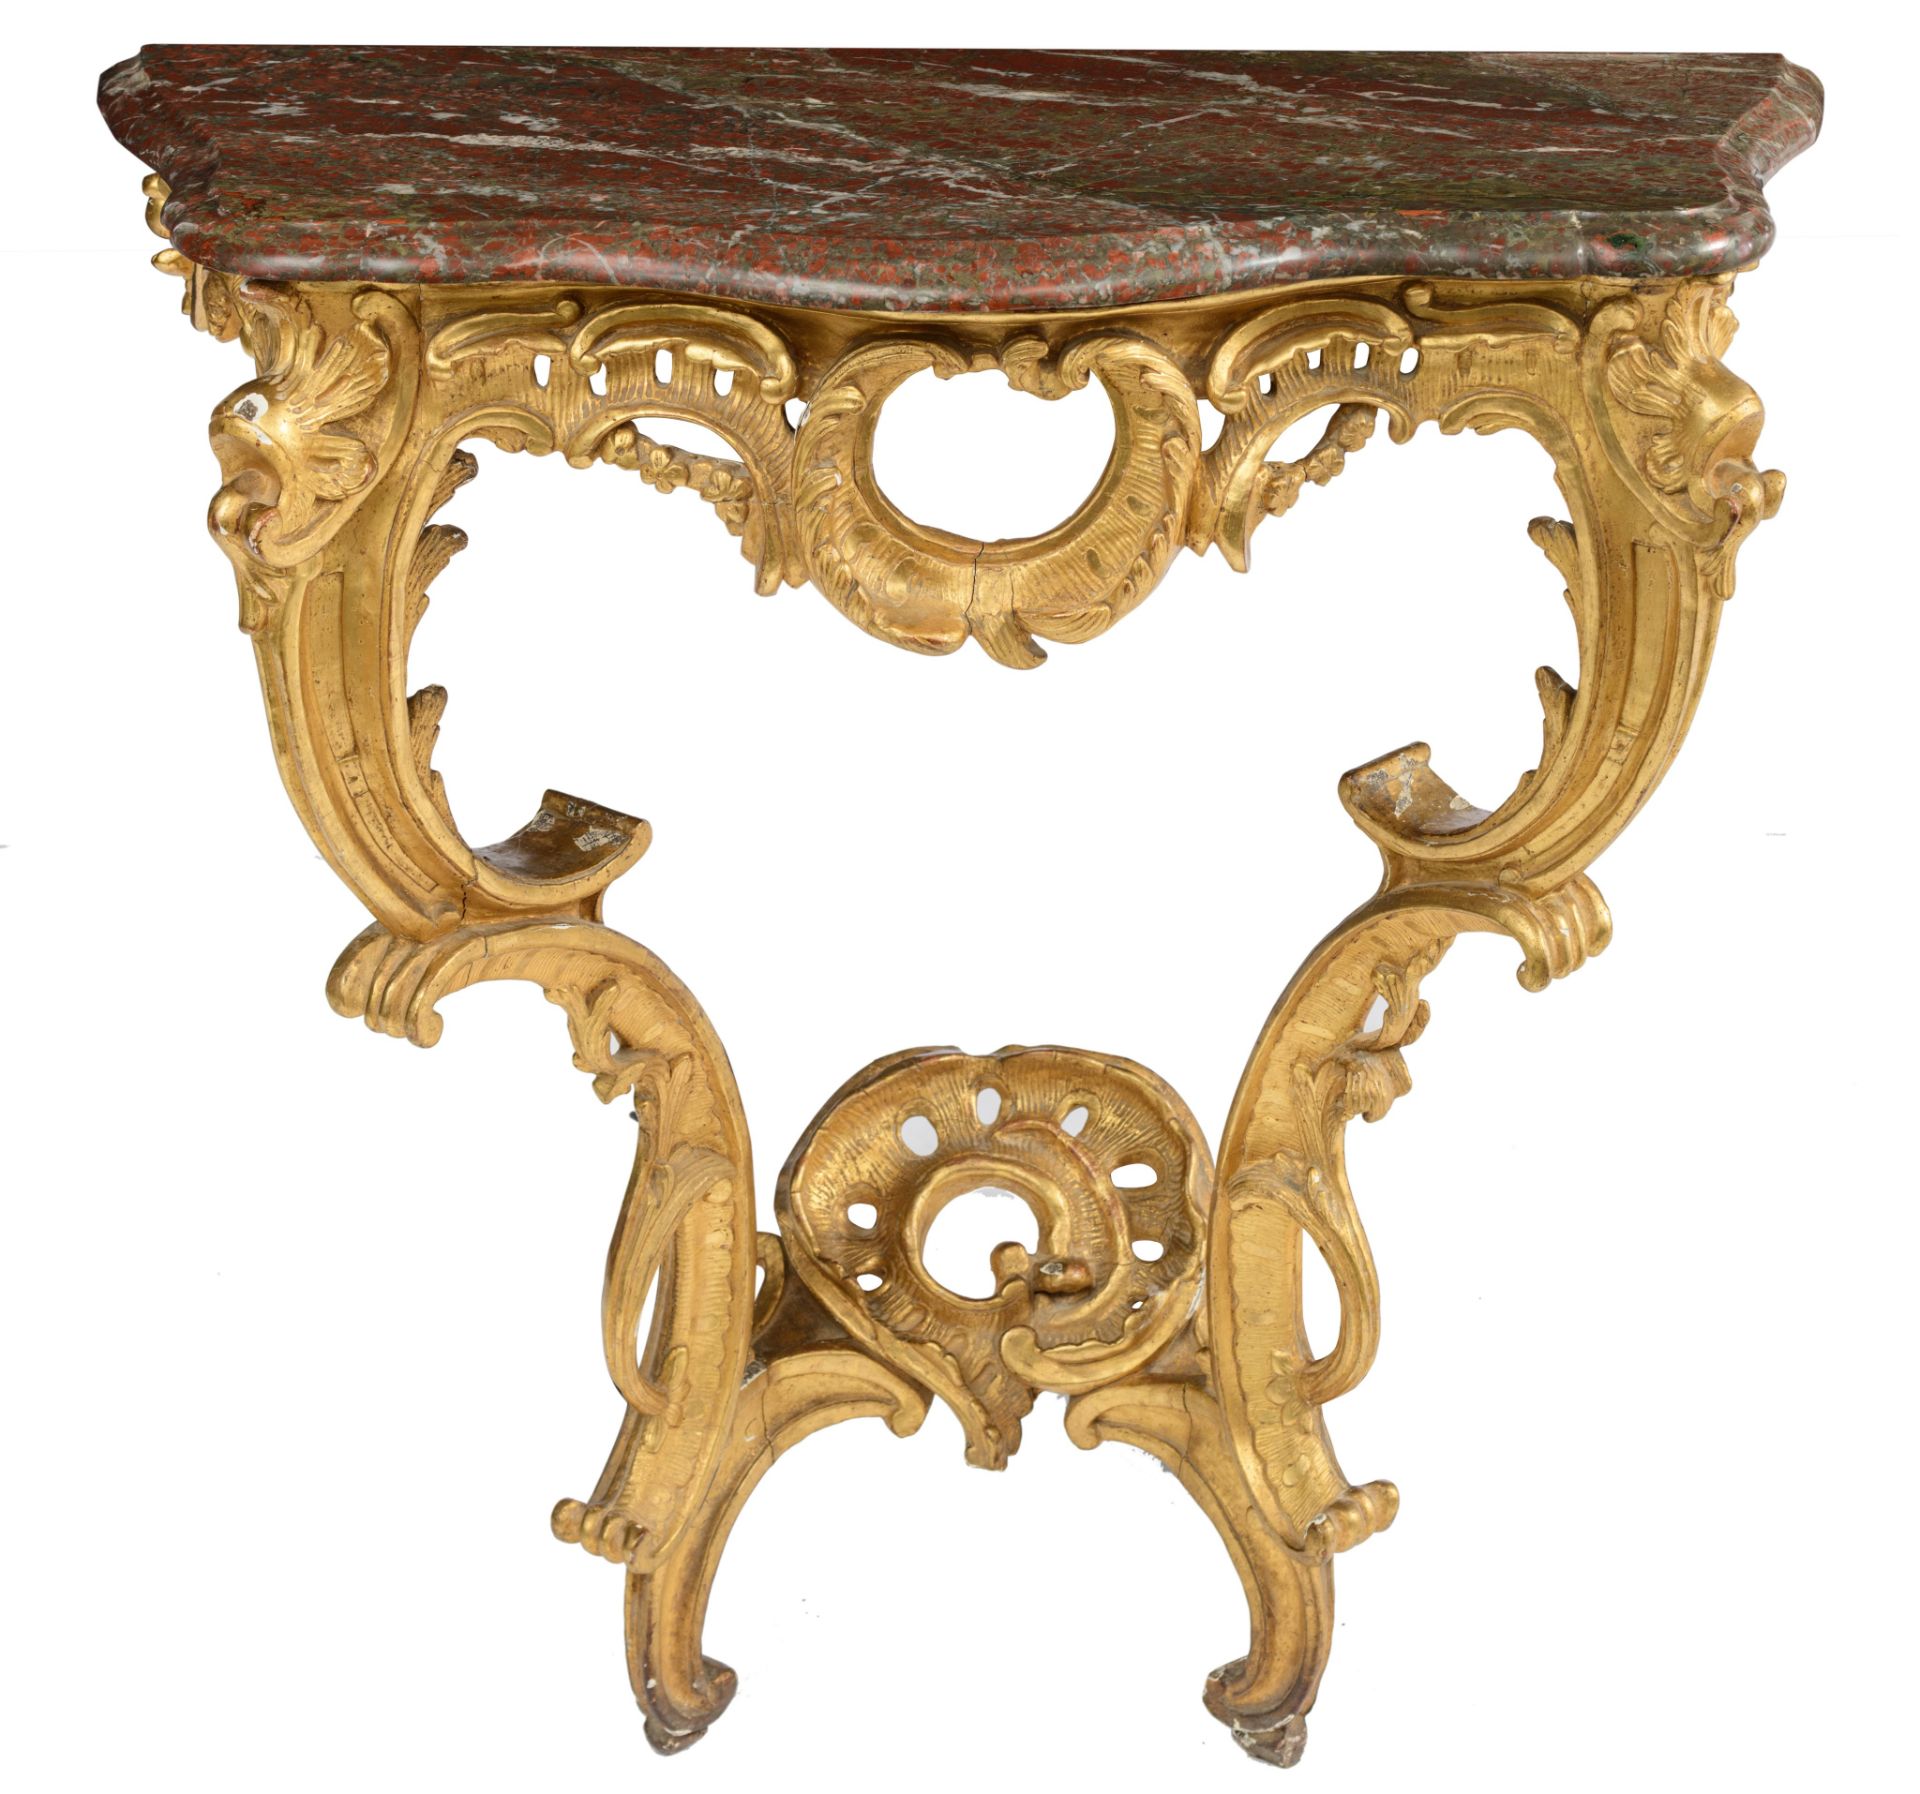 A richly carved giltwood Rococo console table, mid 18thC, H 83 - W 81,5 - D 48,5 cm